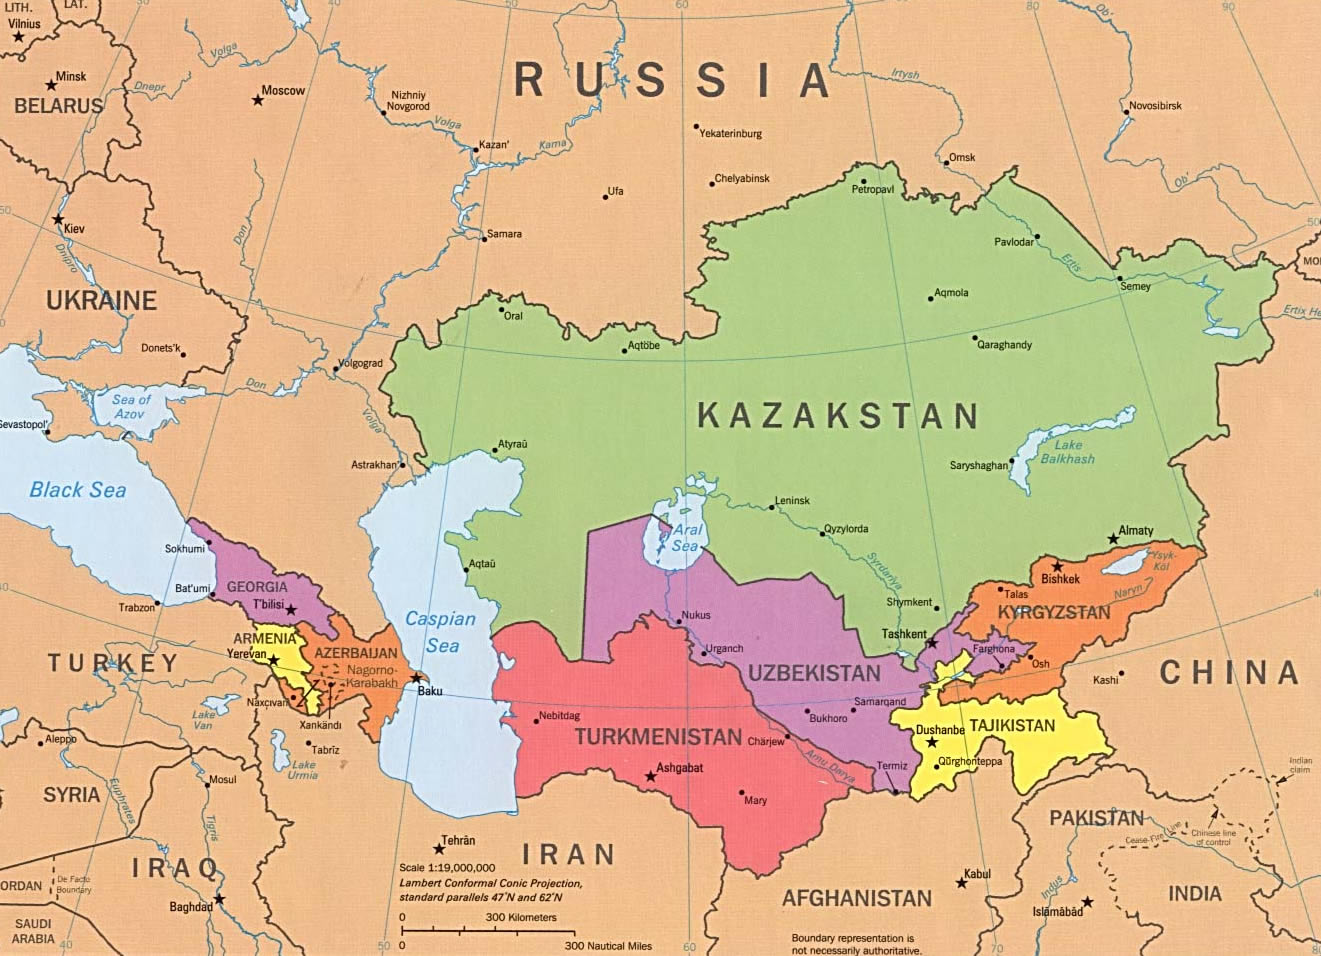 Vol. 6 nr. 10 | 2013 – The East-West Strategic Corridor from Central Asia to Europe and Ukraine’s Interests